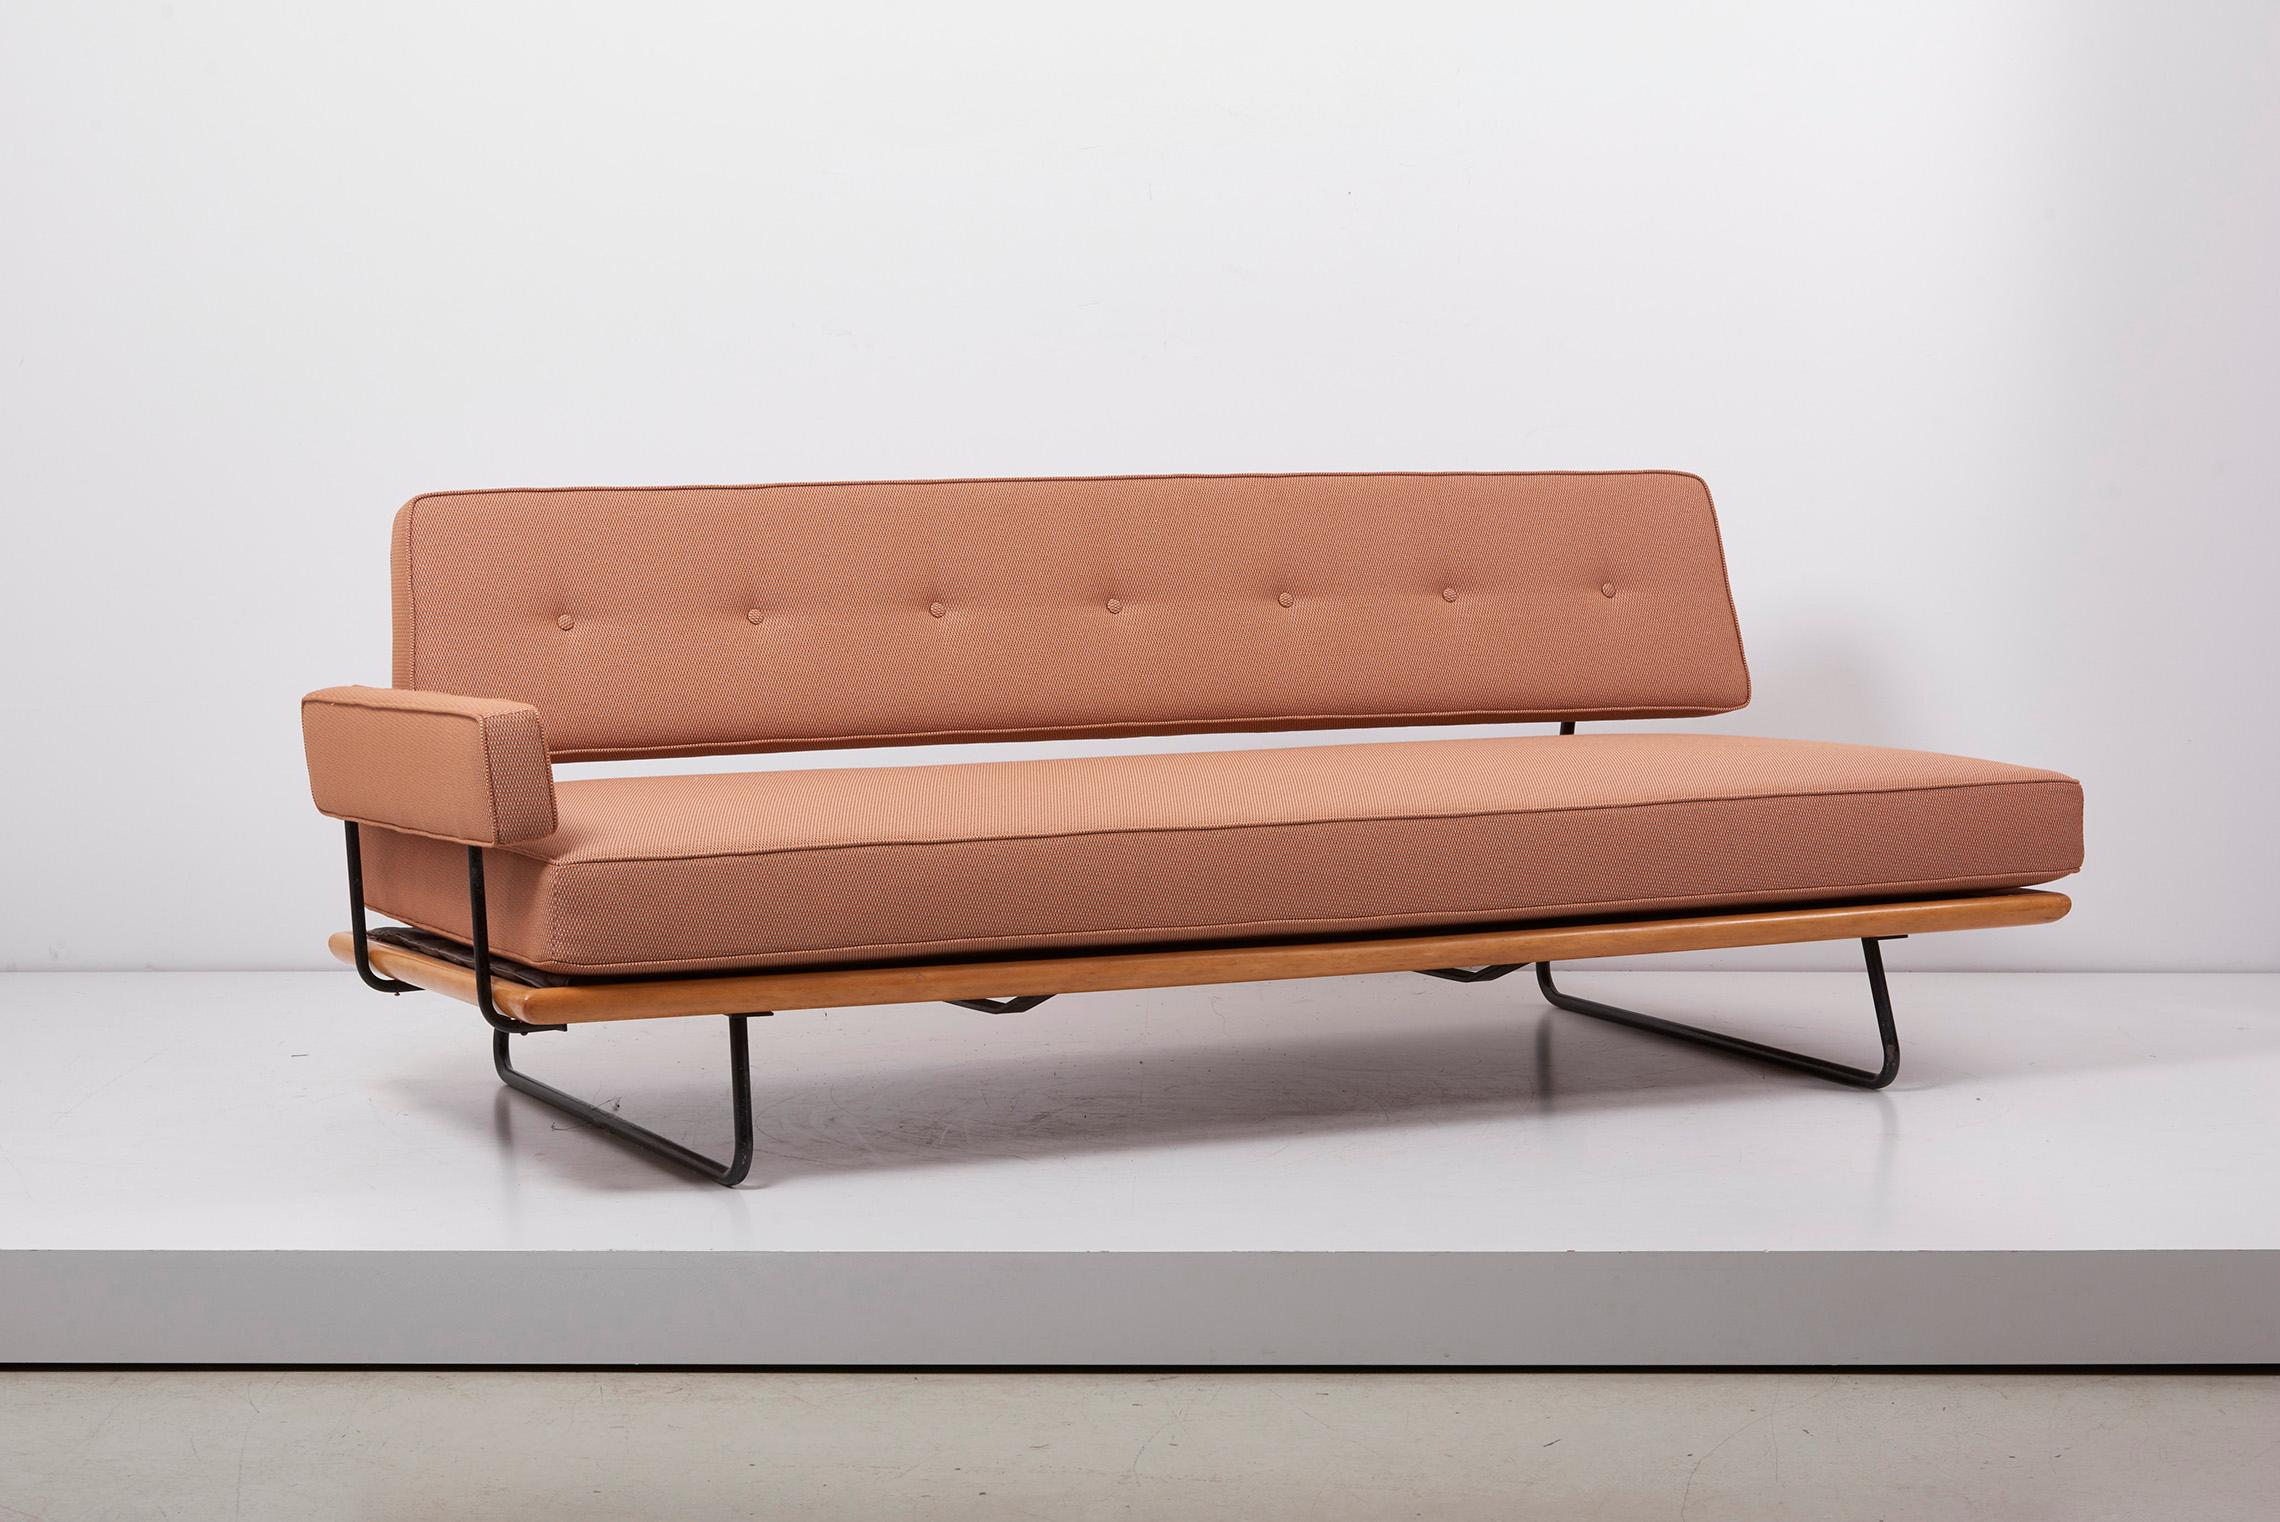 1950s Minimalist daybed Rolf Grunow for Knoll, beechwood and metal, new upholstery
freestanding, new upholstery and new fabric, very good condition. Heavy weight mattress with innerspring system. The daybed comes with the armrest.